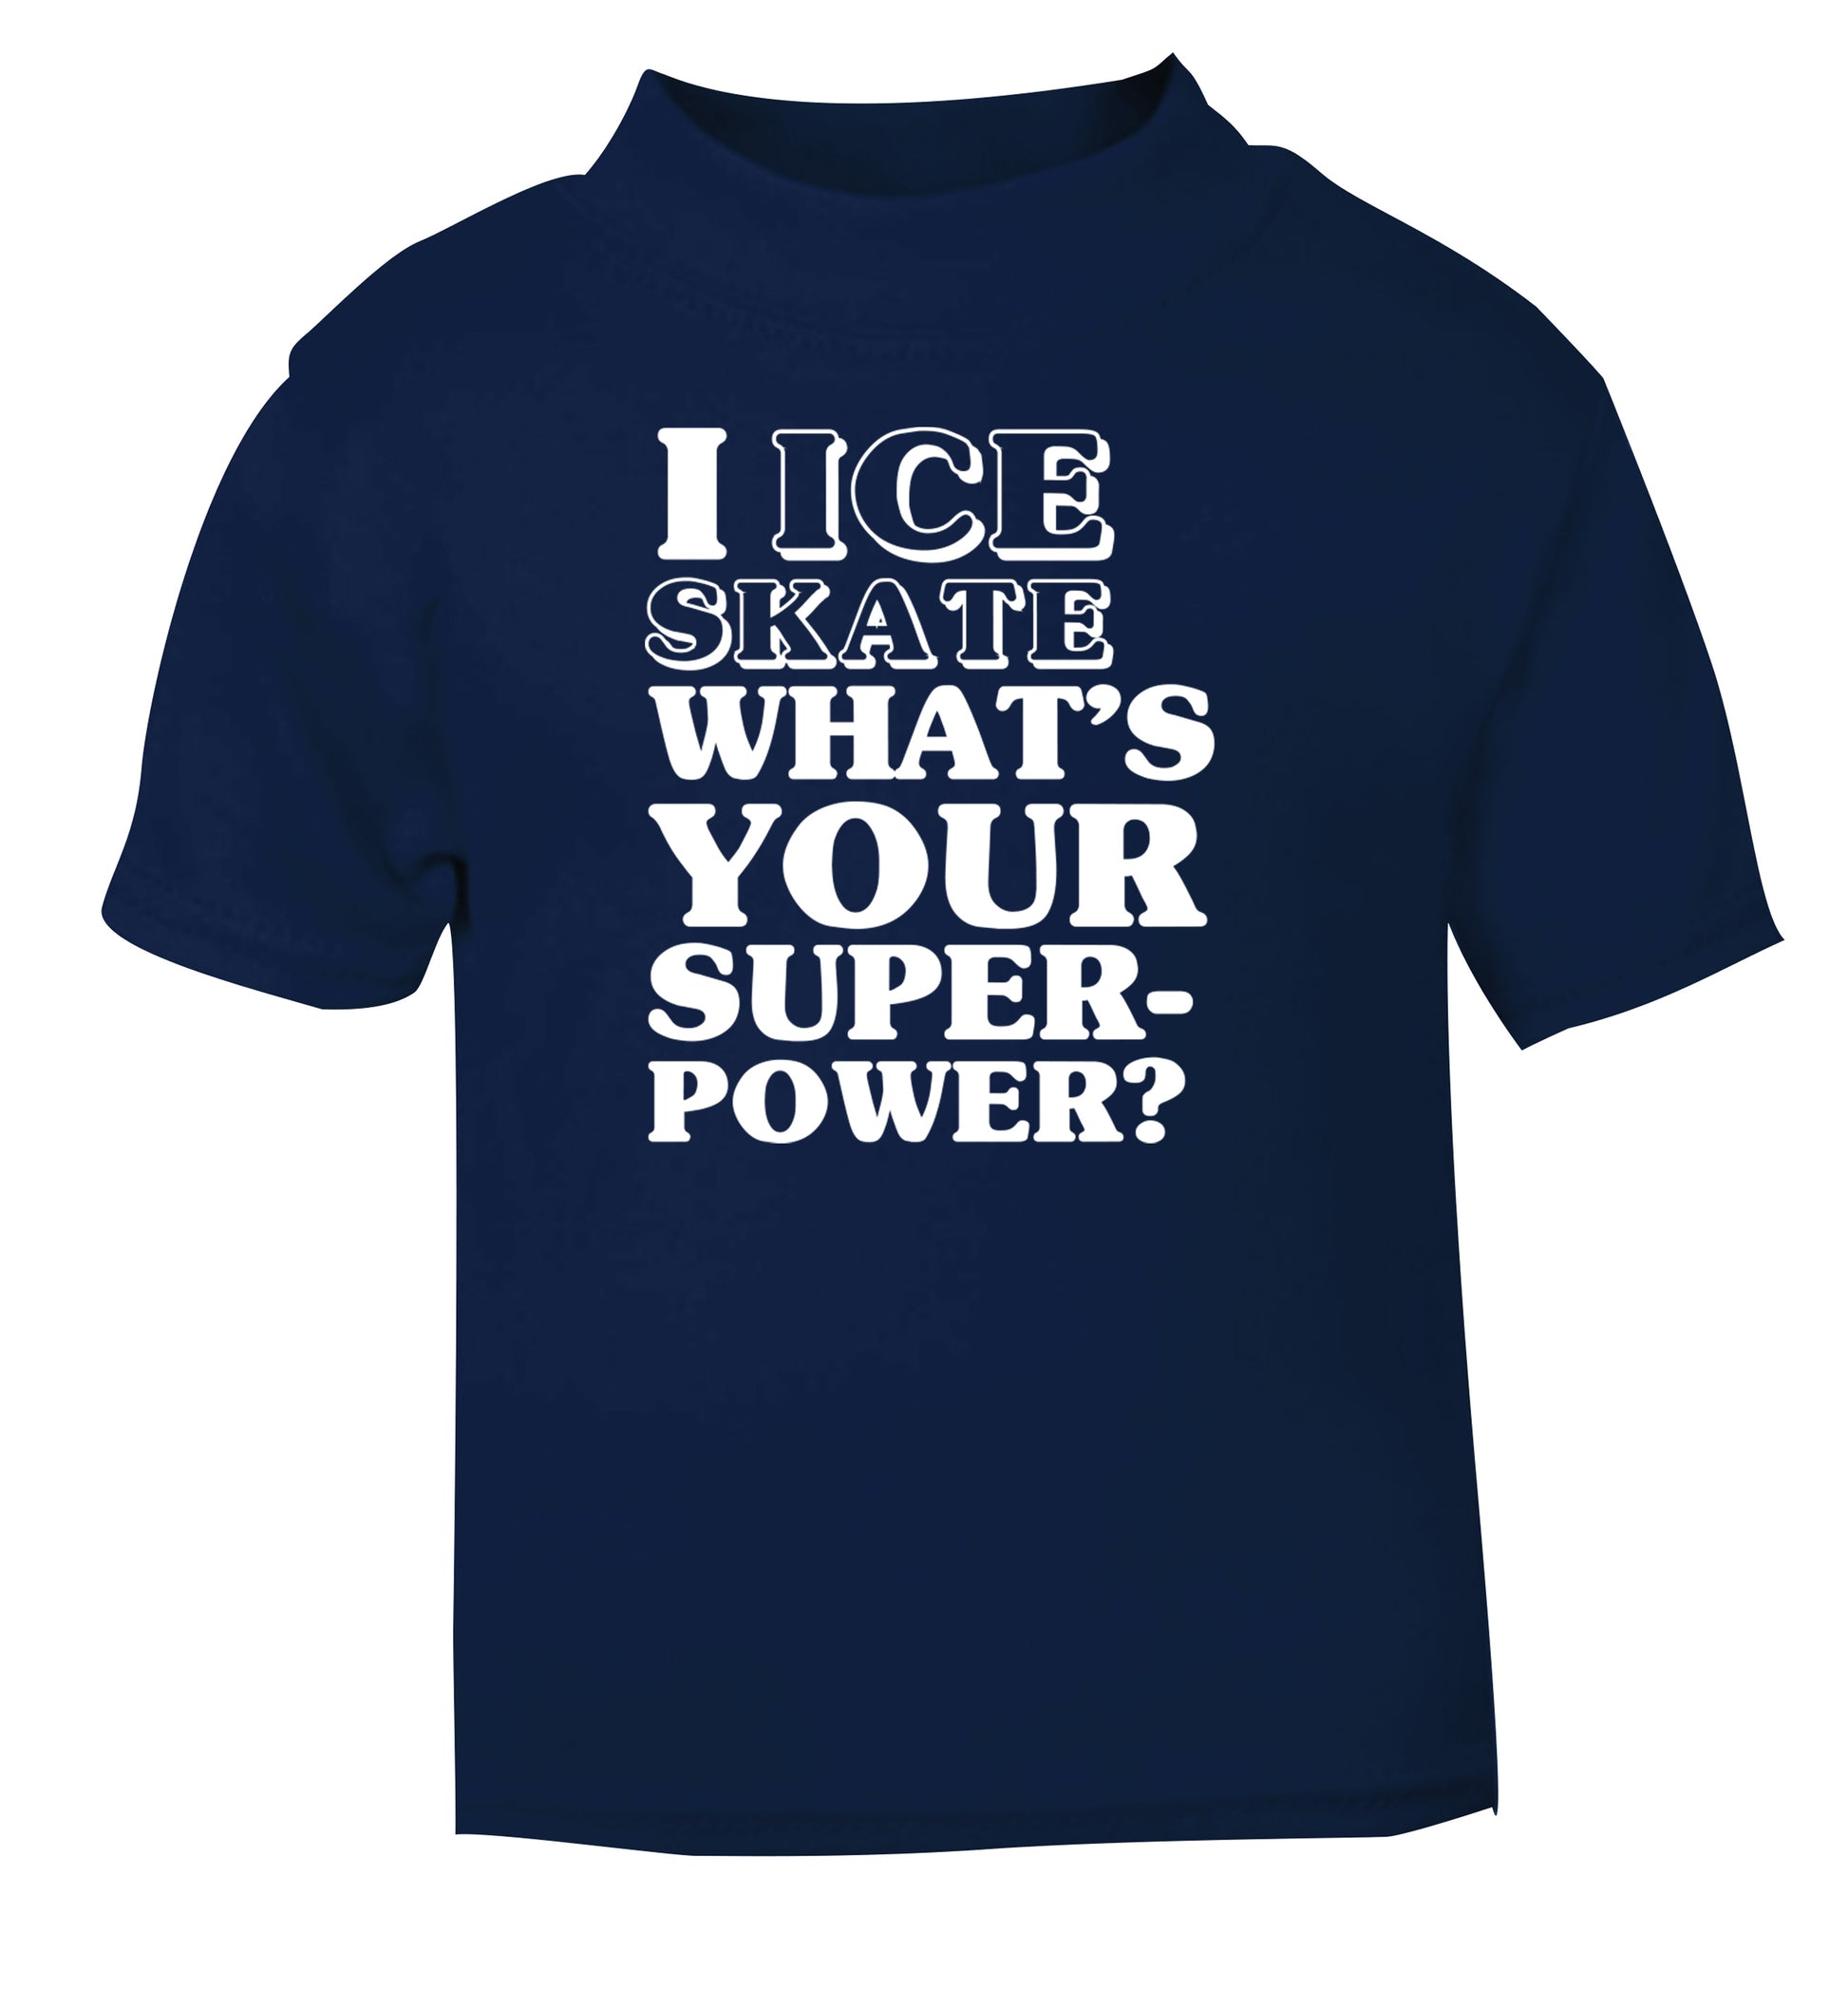 I ice skate what's your superpower? navy Baby Toddler Tshirt 2 Years